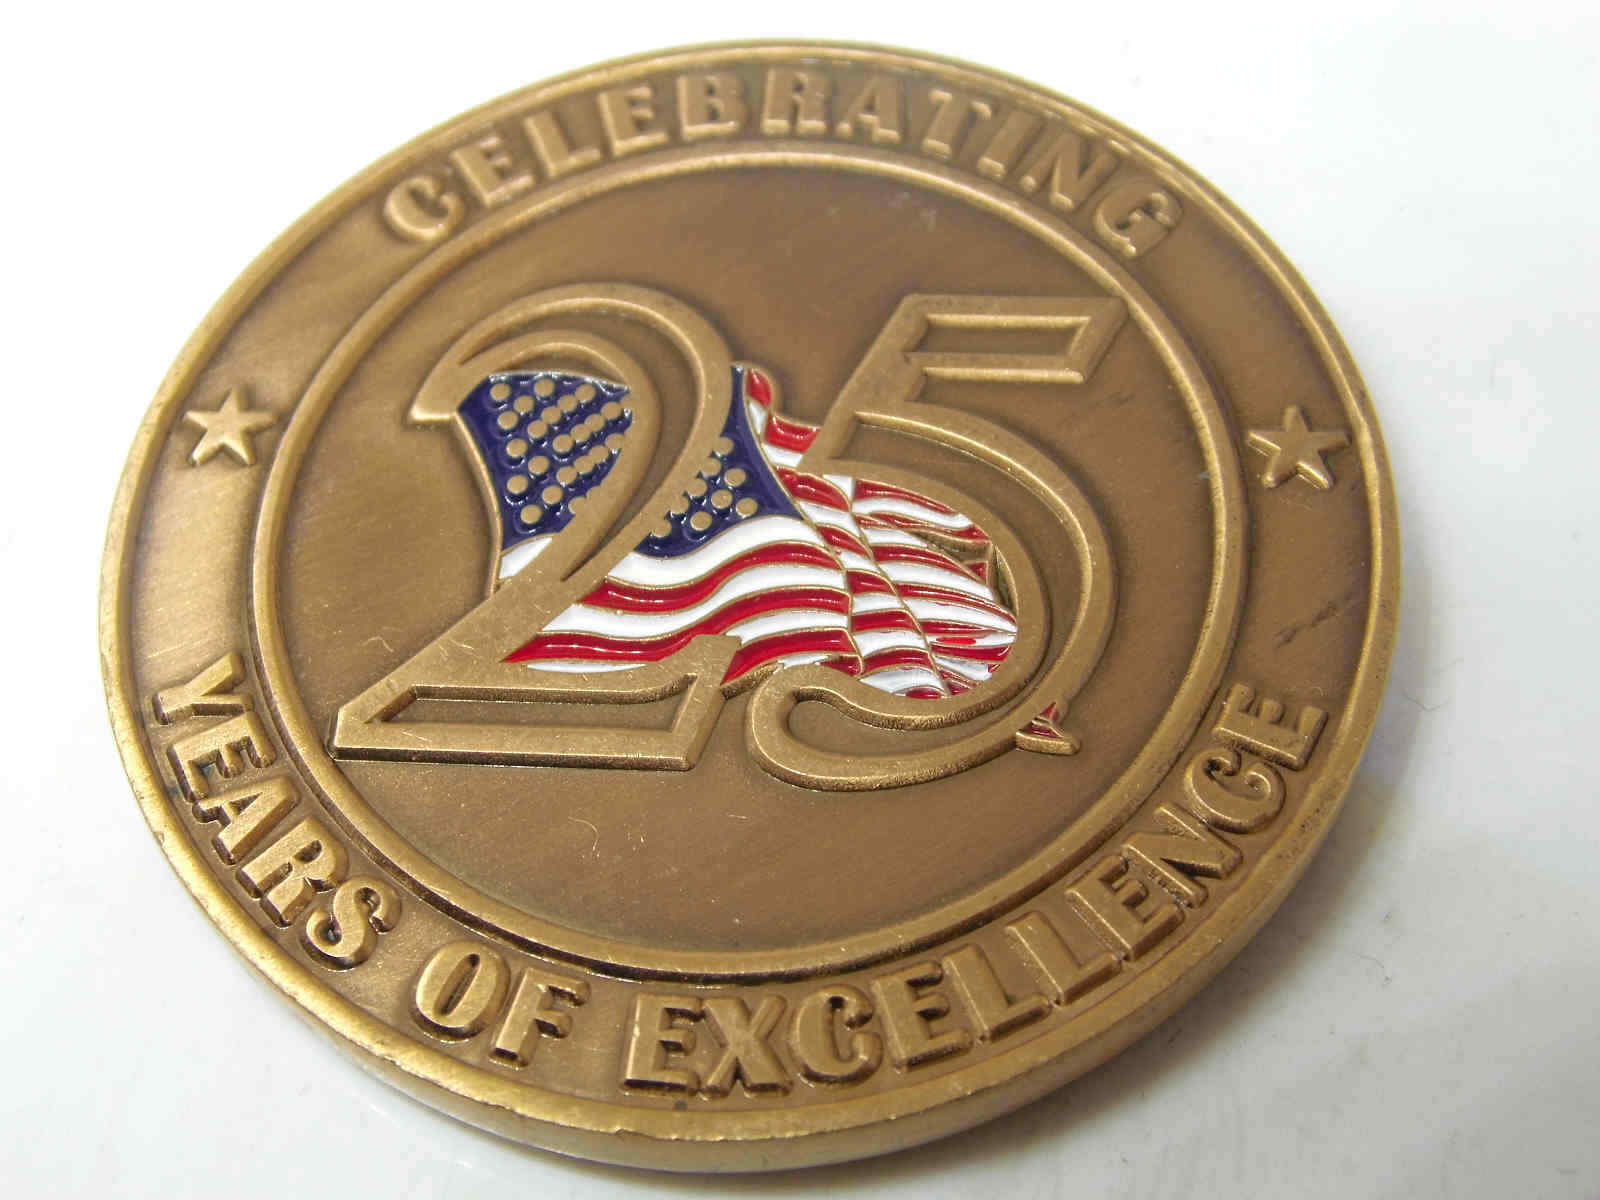 VPP STAR WORKSITE CELEBRATING 25 YEARS OF EXCELLENCE CHALLENGE COIN